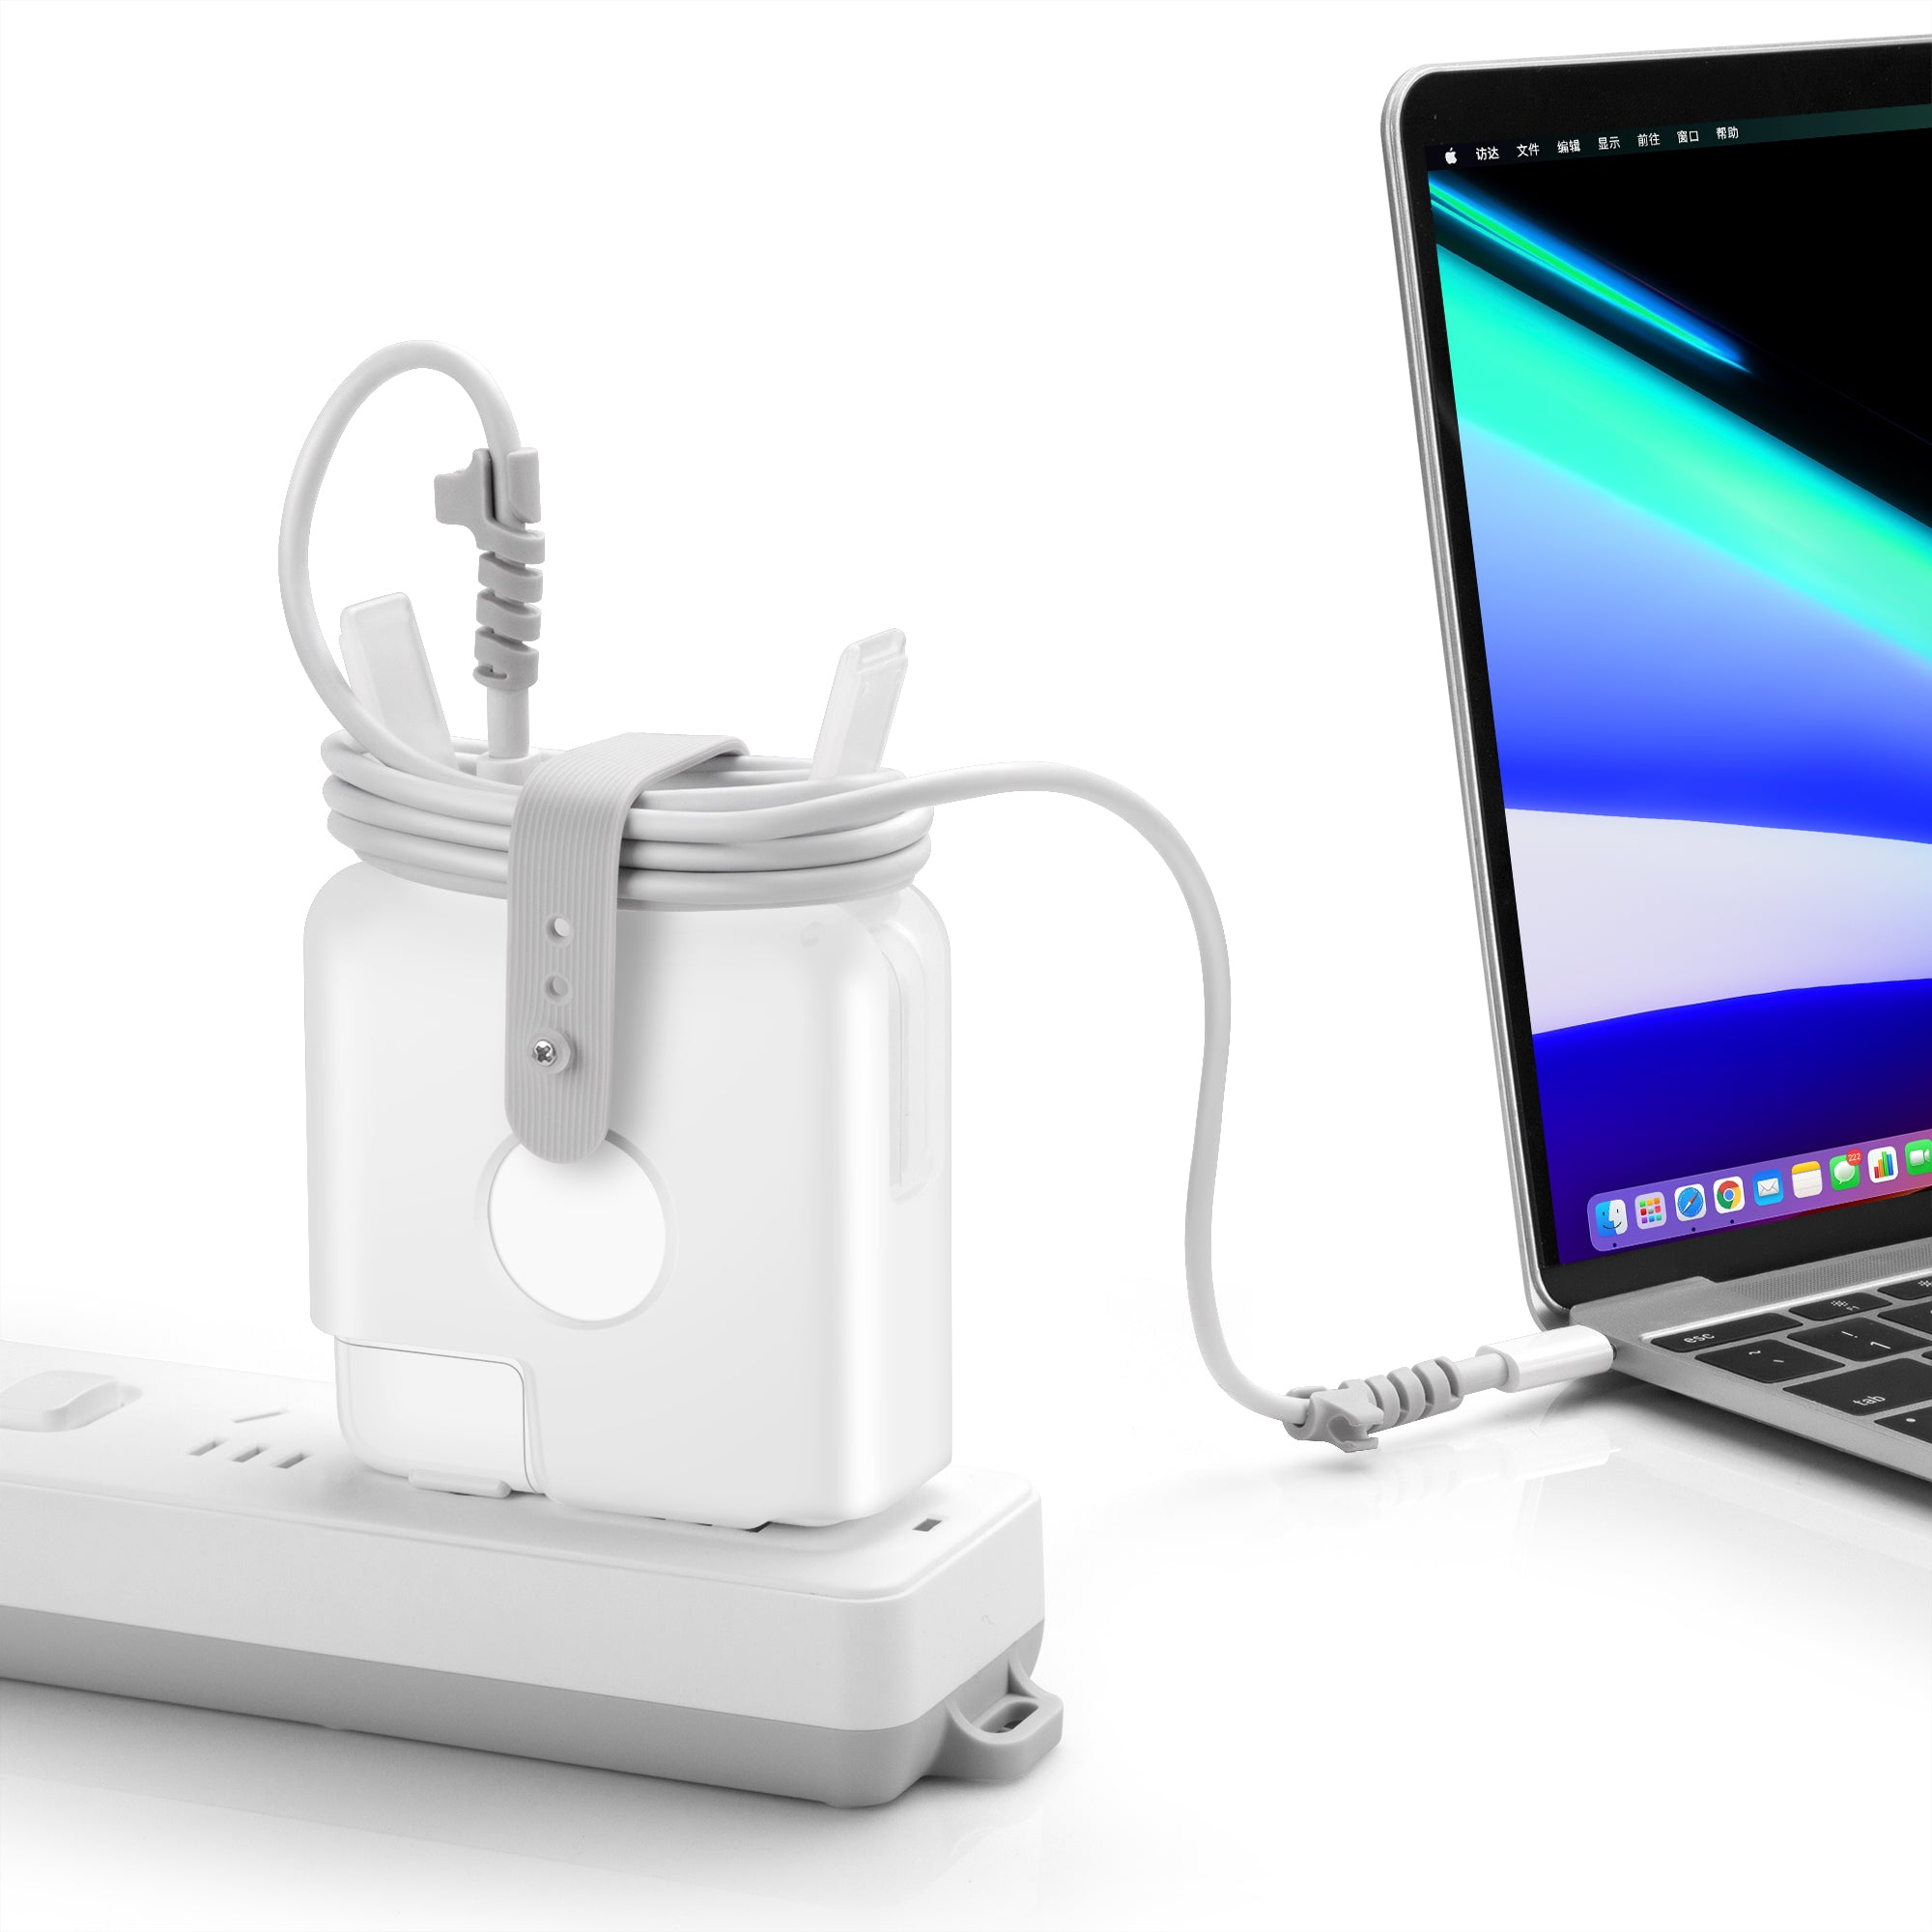  Mac Book Pro Charger, 61W/67W USB C Charger Power